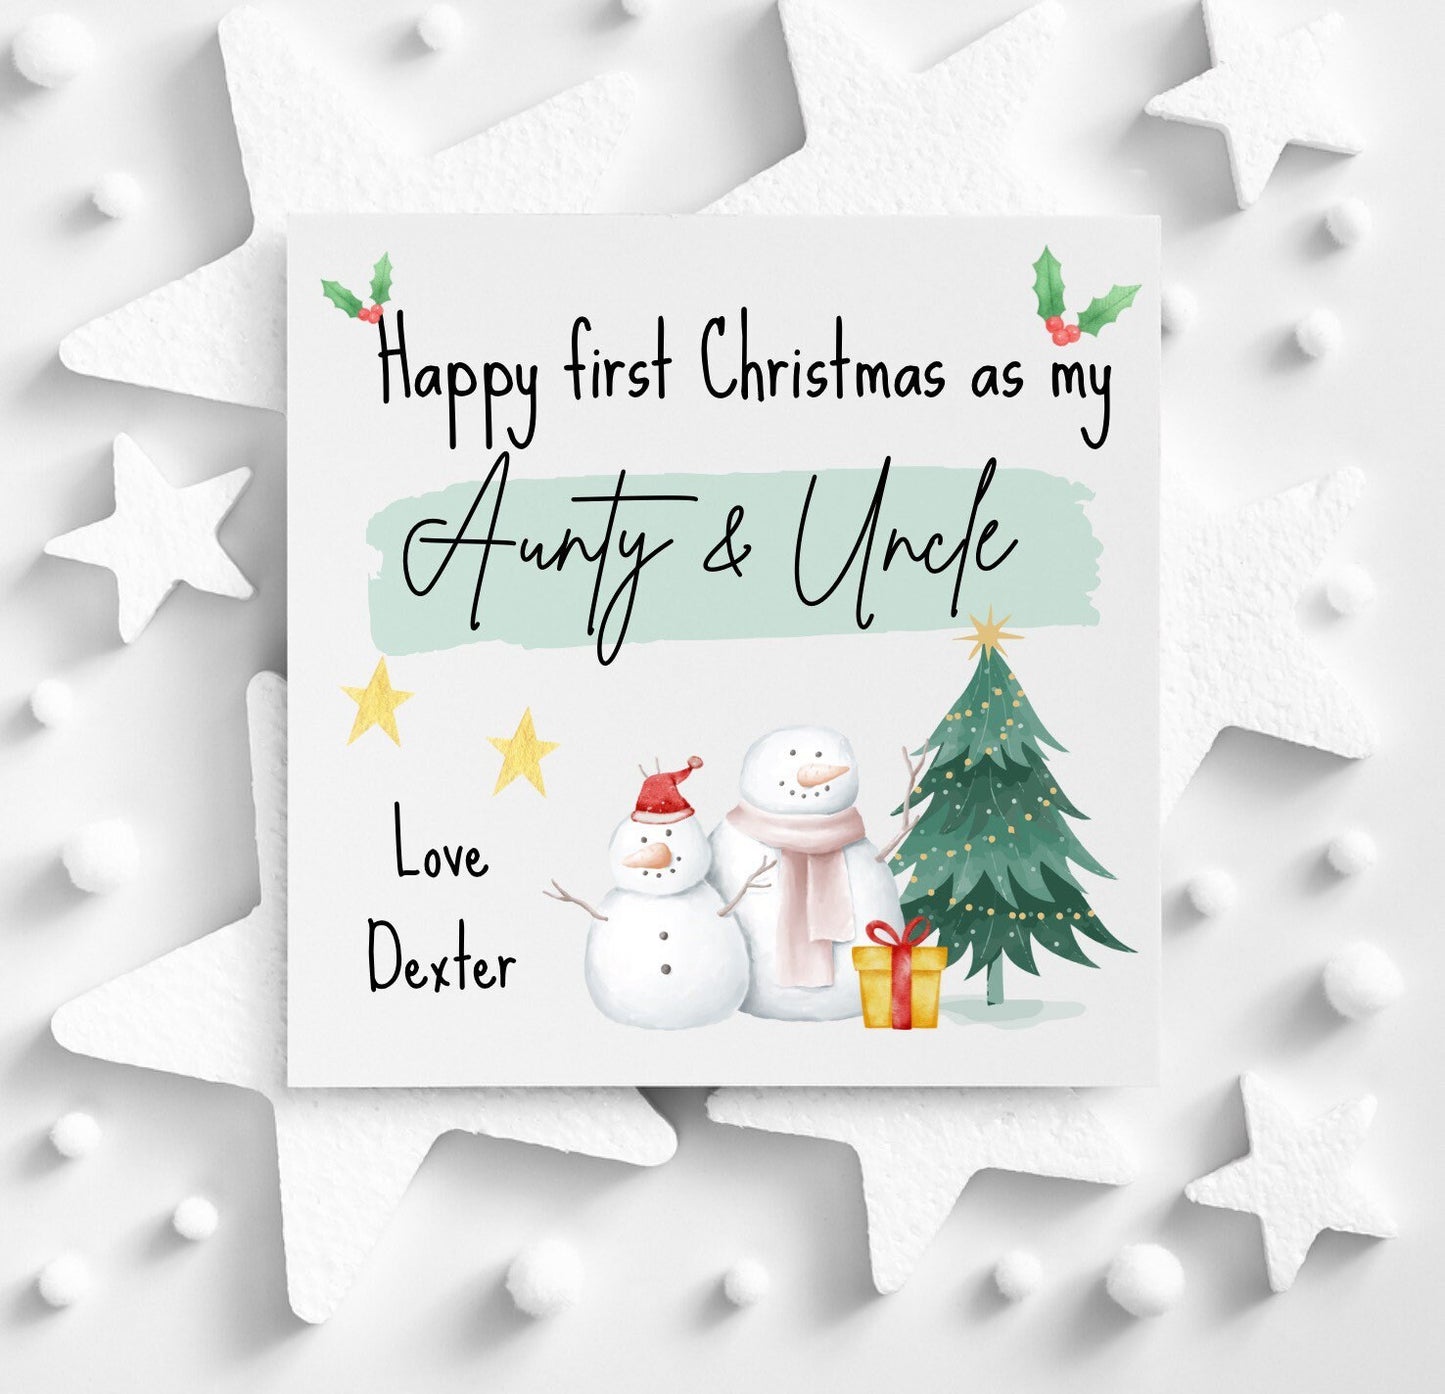 Happy first Christmas as my aunty and uncle greeting card, baby first Christmas card to send to Aunt and Uncle.